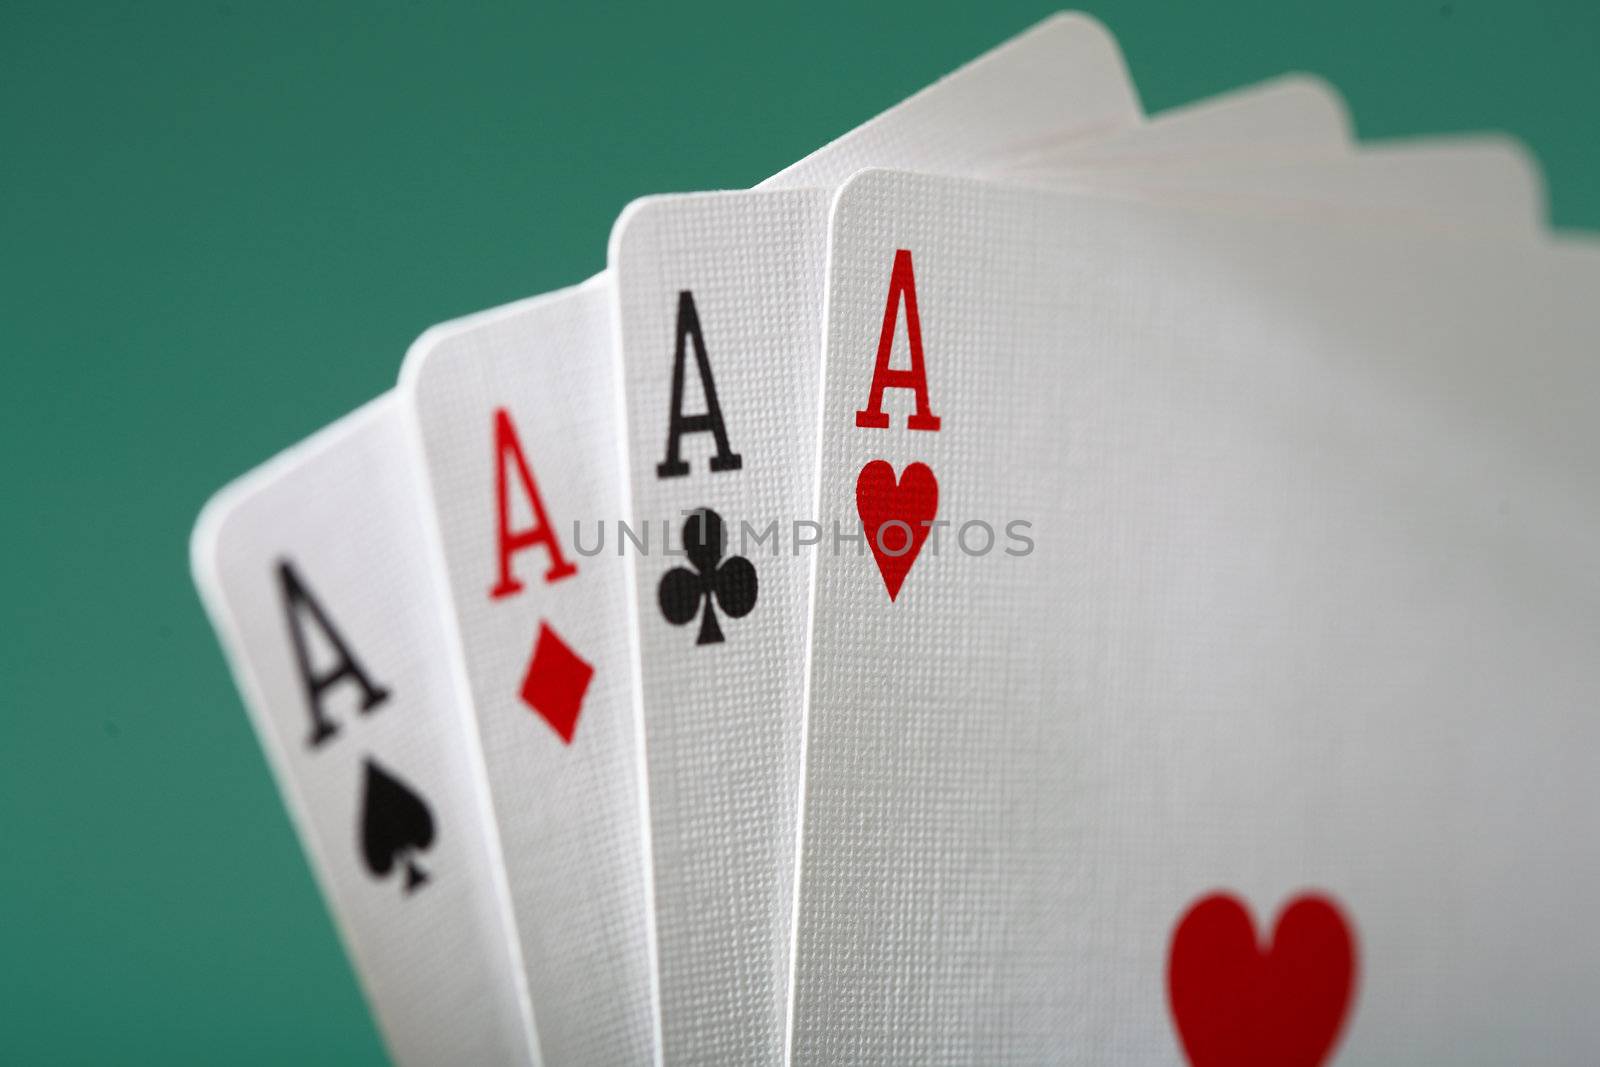 Four Aces by Stocksnapper